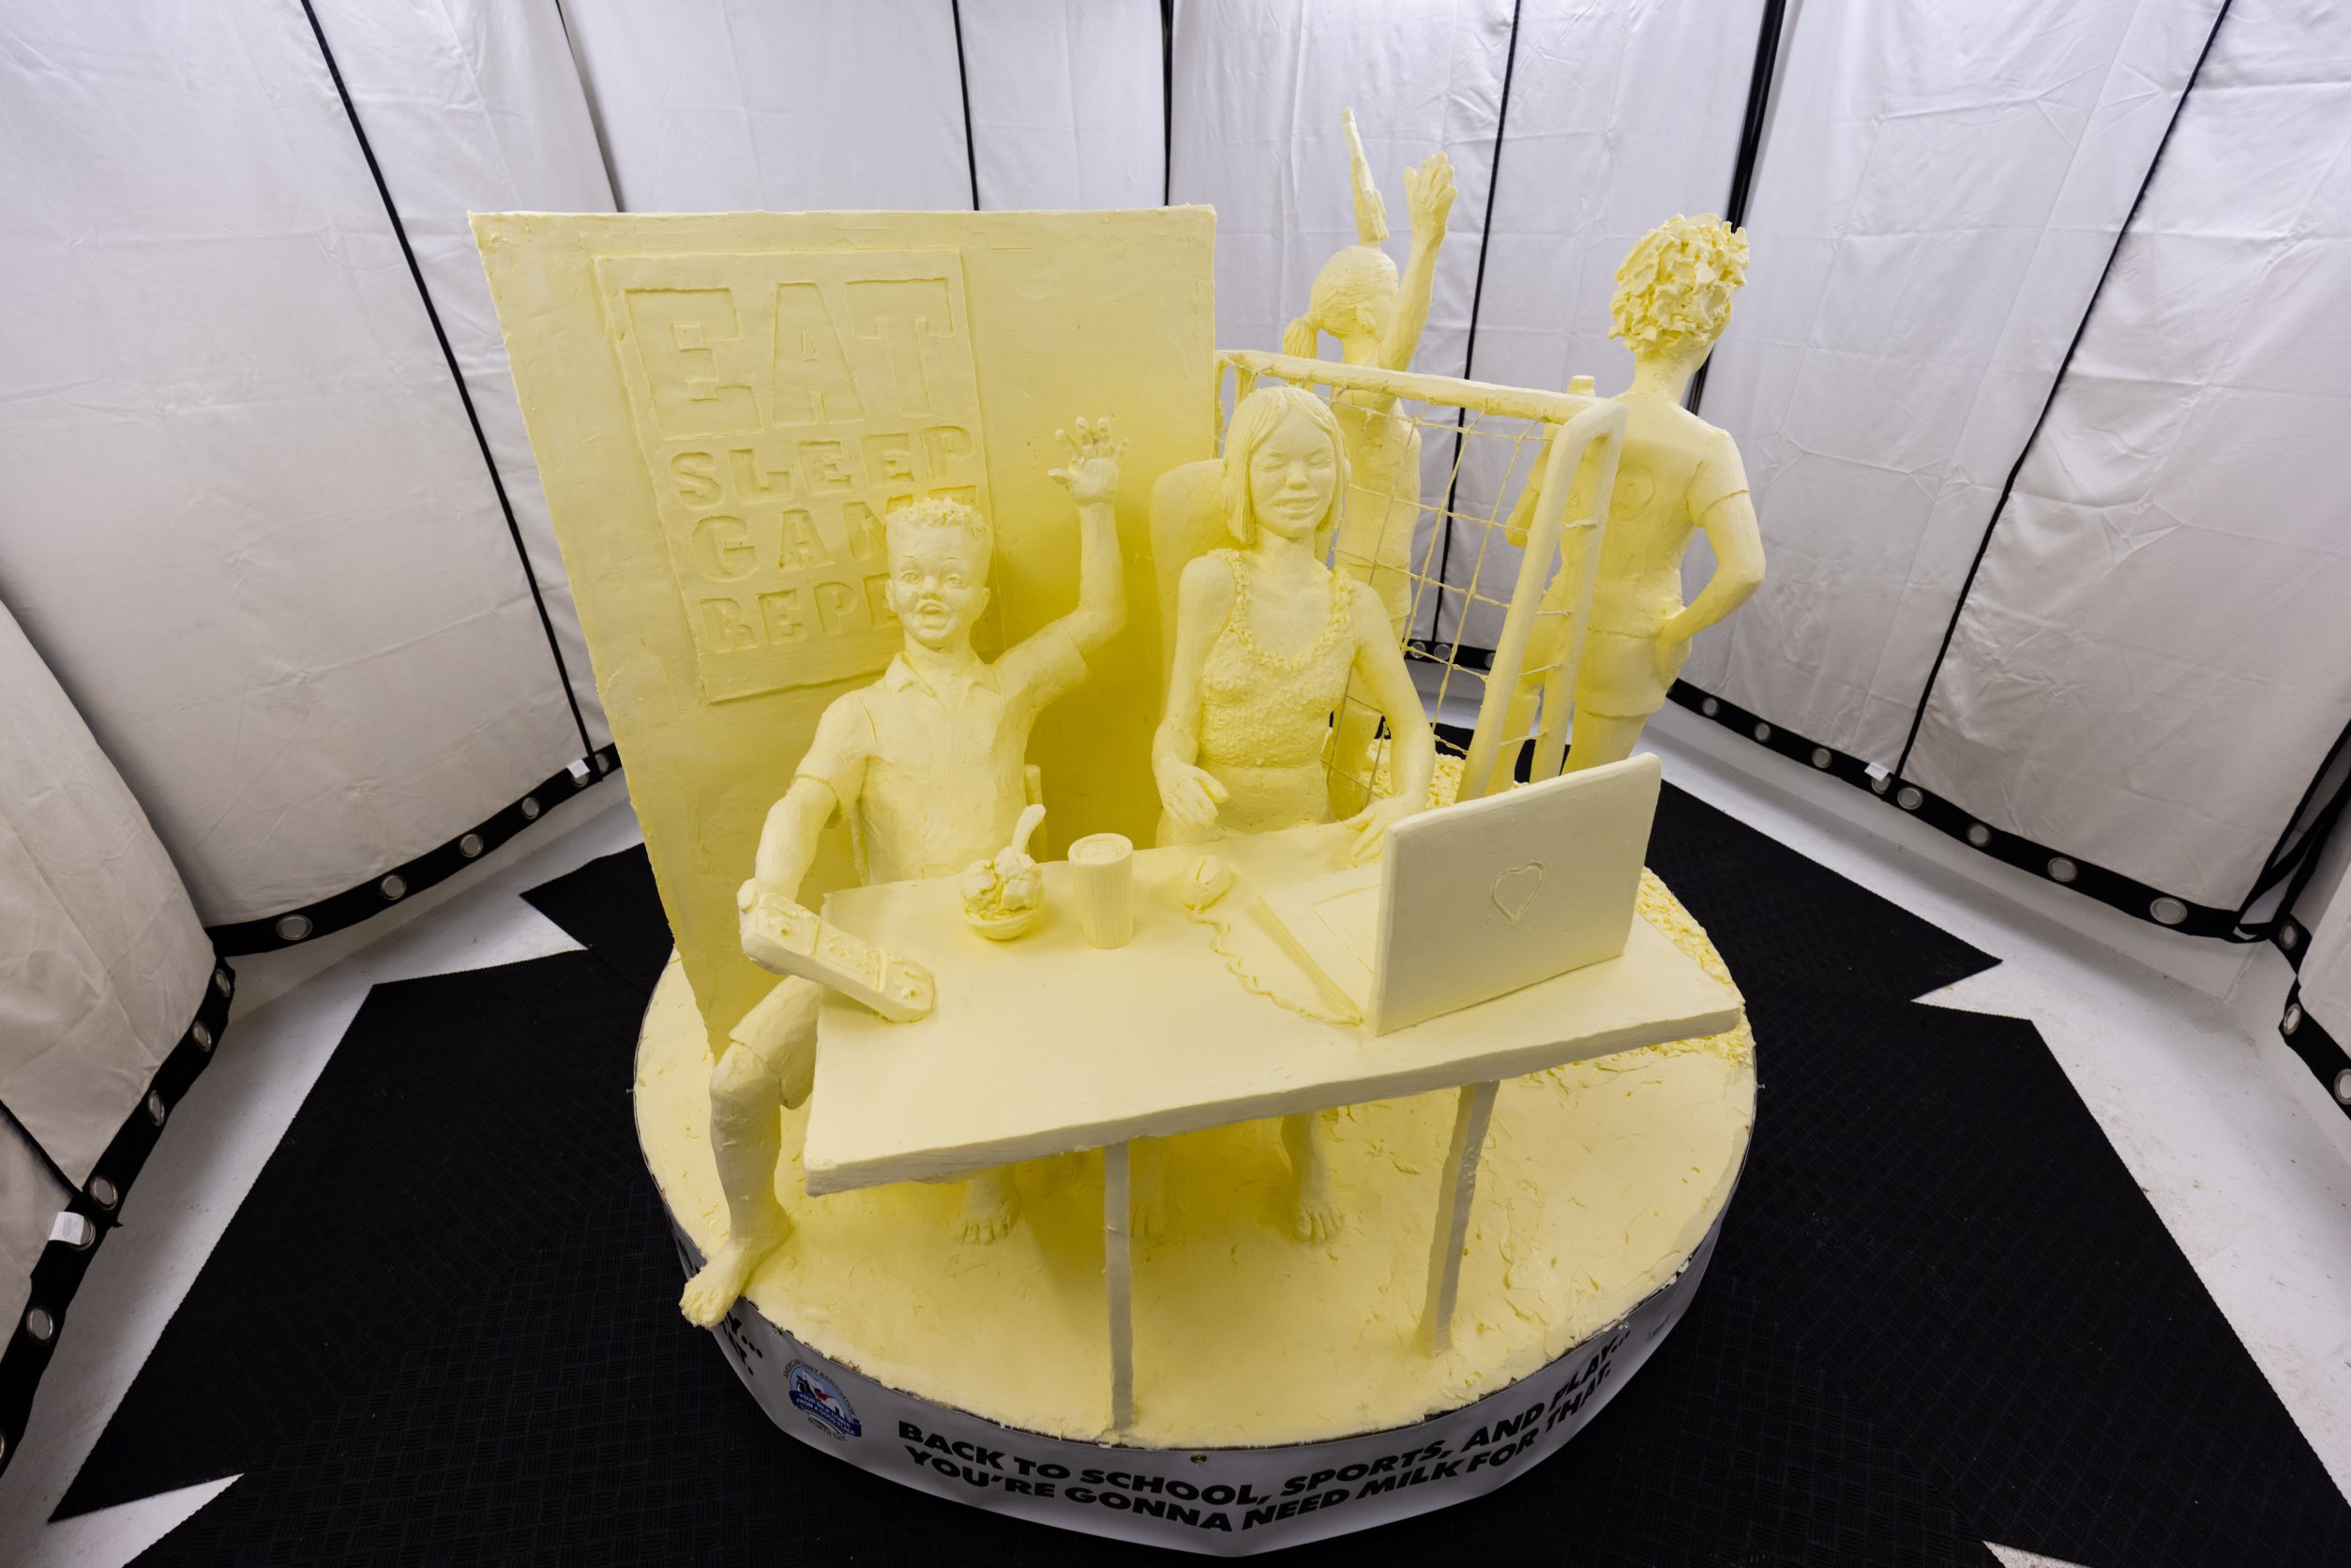 Butter sculpture of kids playing a video game